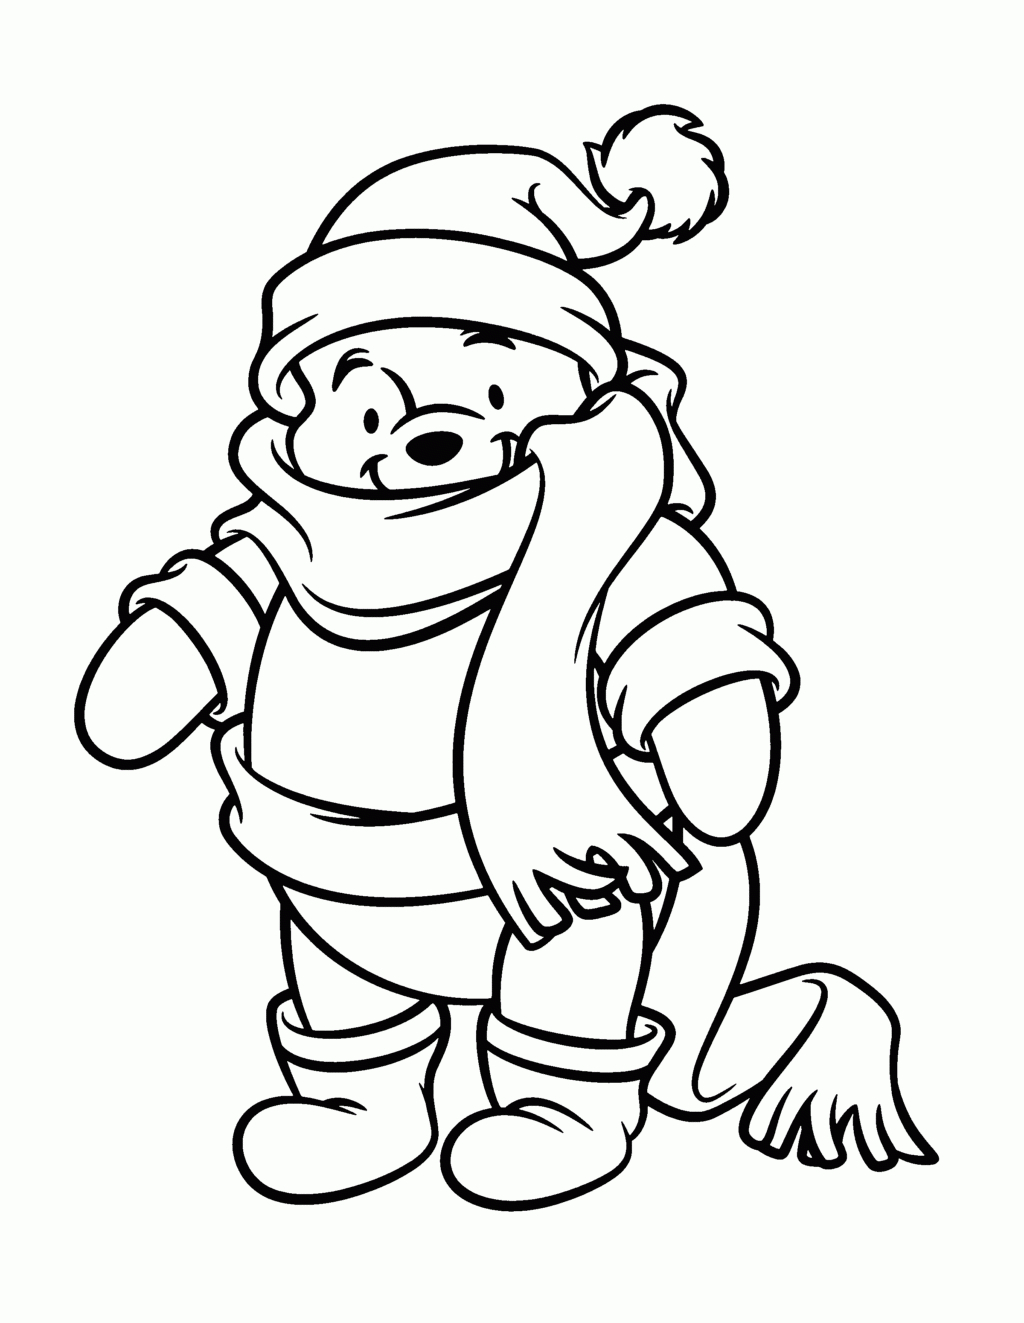 Coloring Book World ~ Free Printable Winter Coloring Pages Pooh - Free Printable Winter Coloring Pages